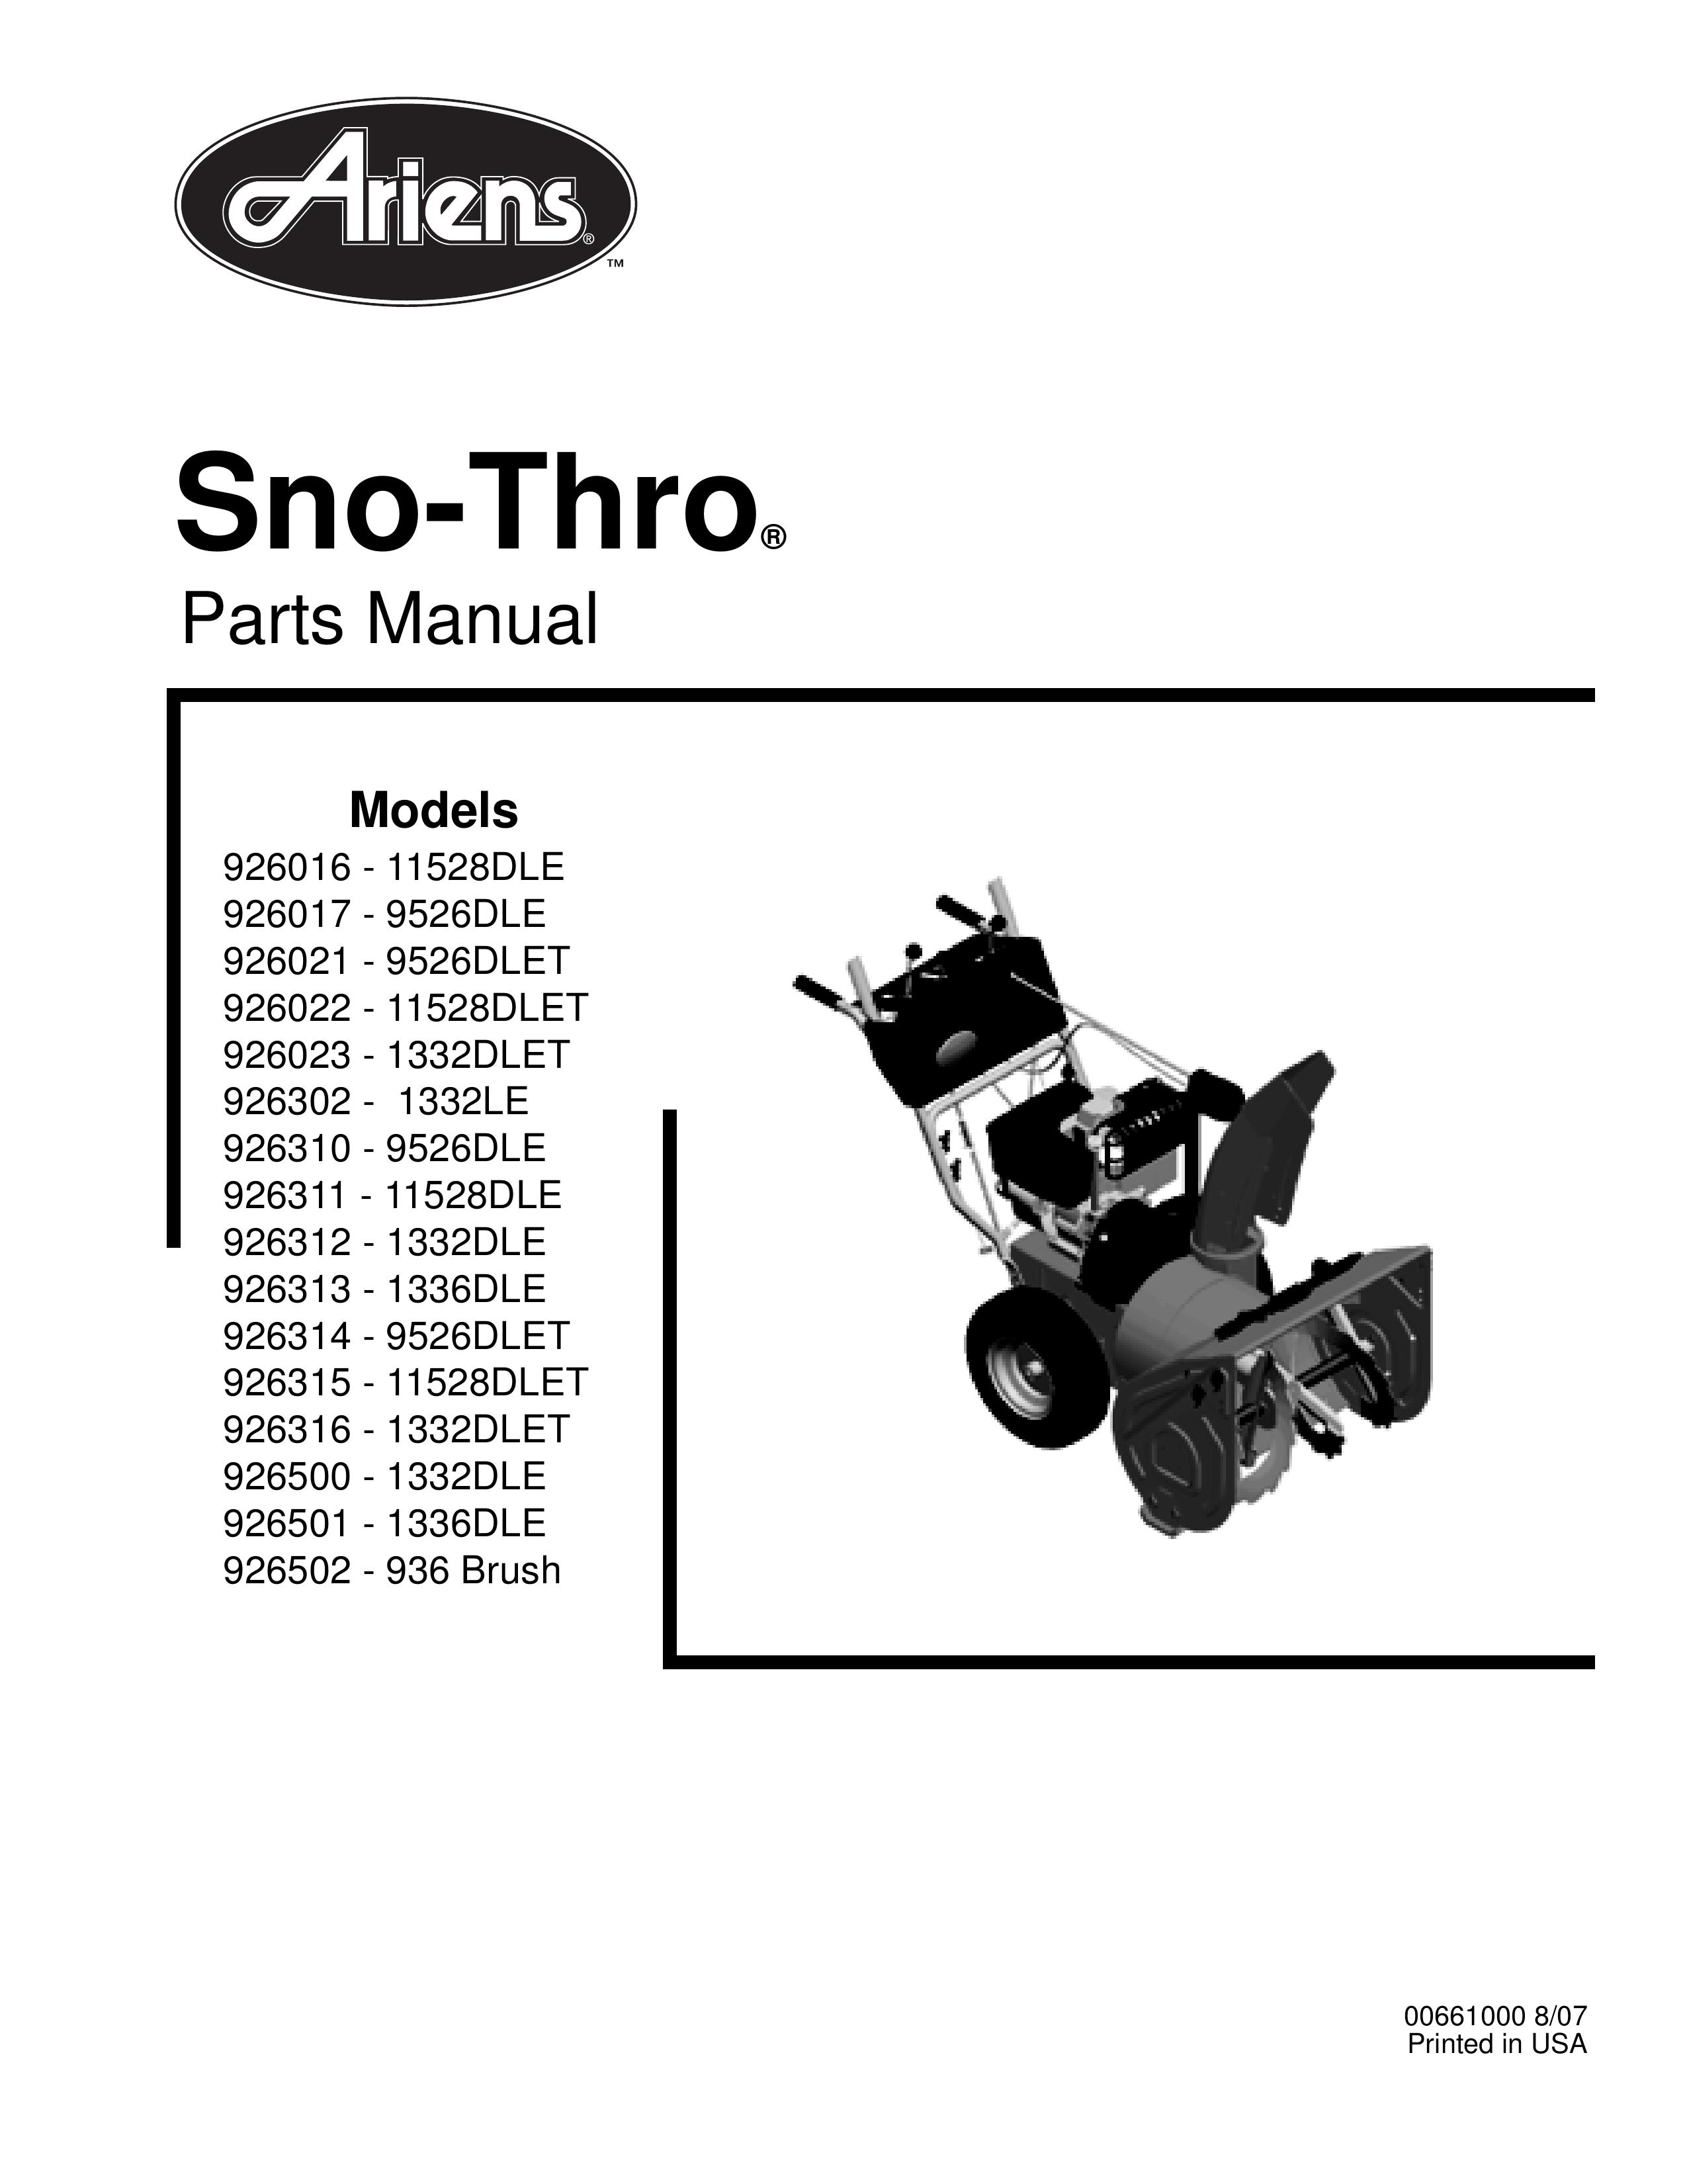 Ariens 926311 - 11528DLE Snow Blower Attachment User Manual